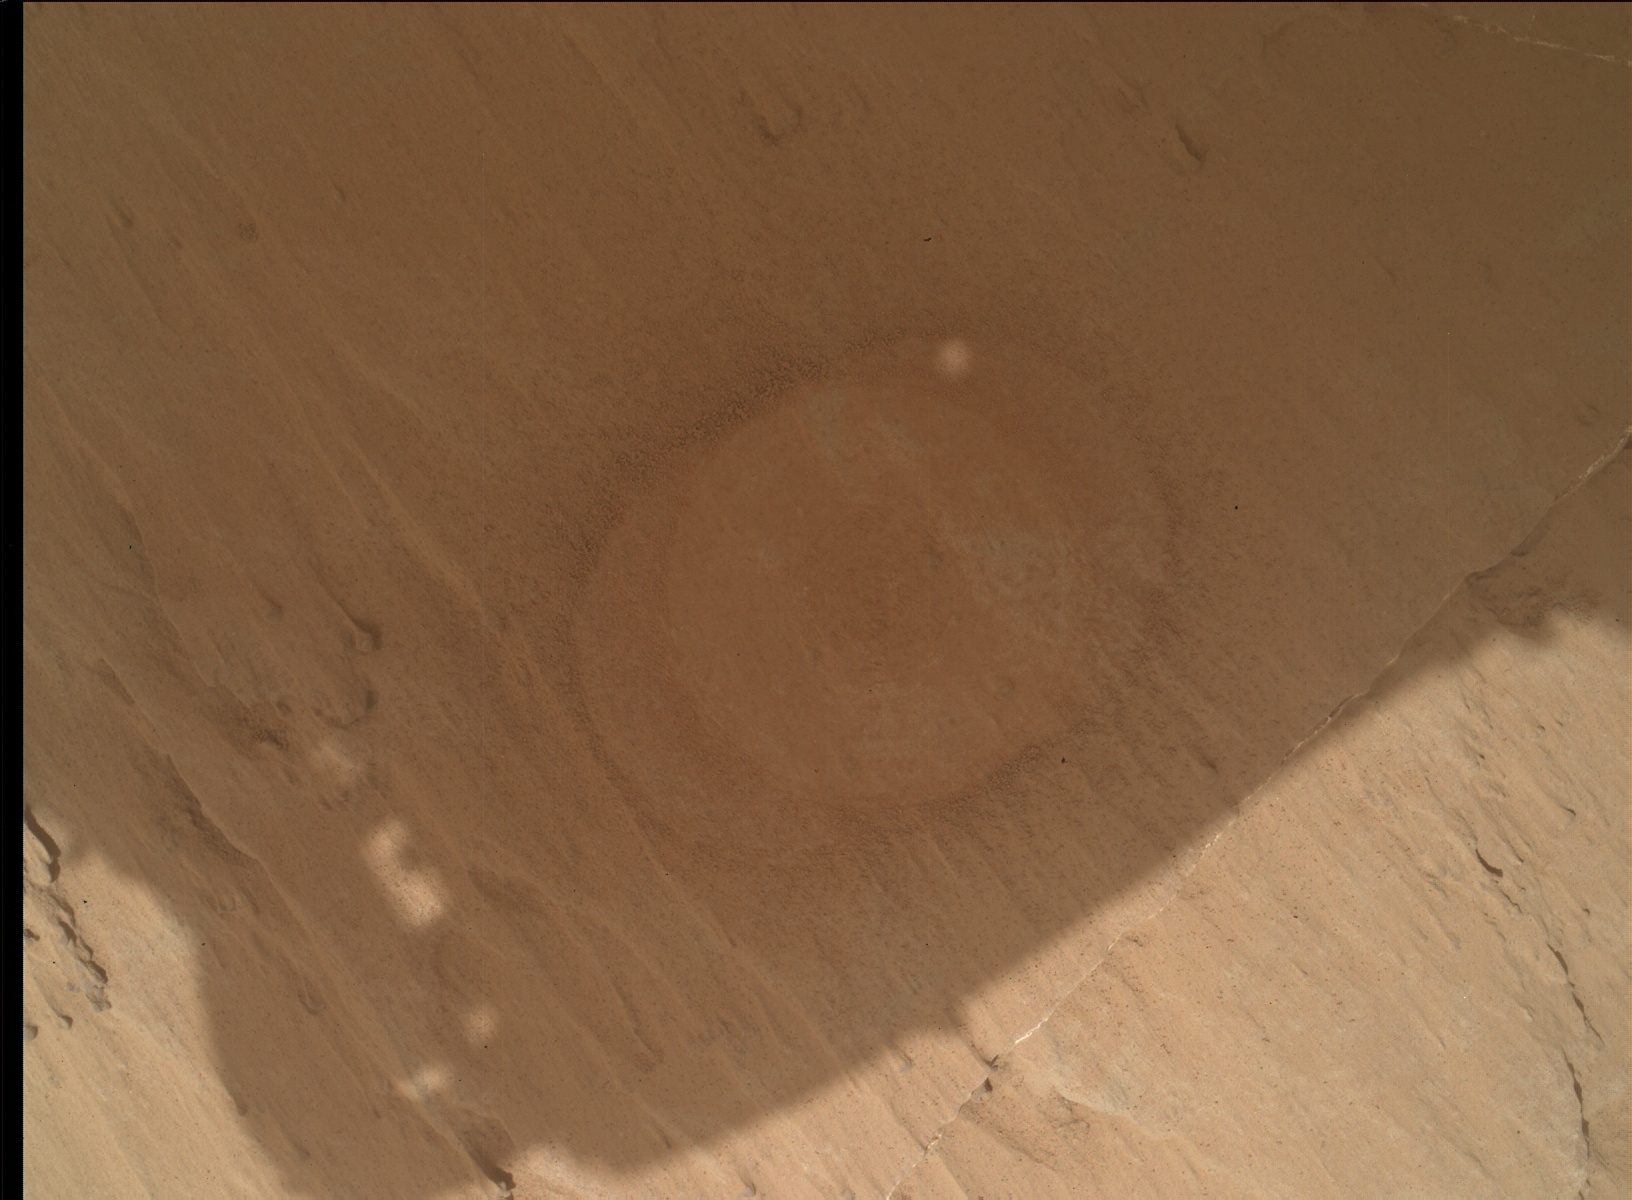 Nasa's Mars rover Curiosity acquired this image using its Mars Hand Lens Imager (MAHLI) on Sol 3546